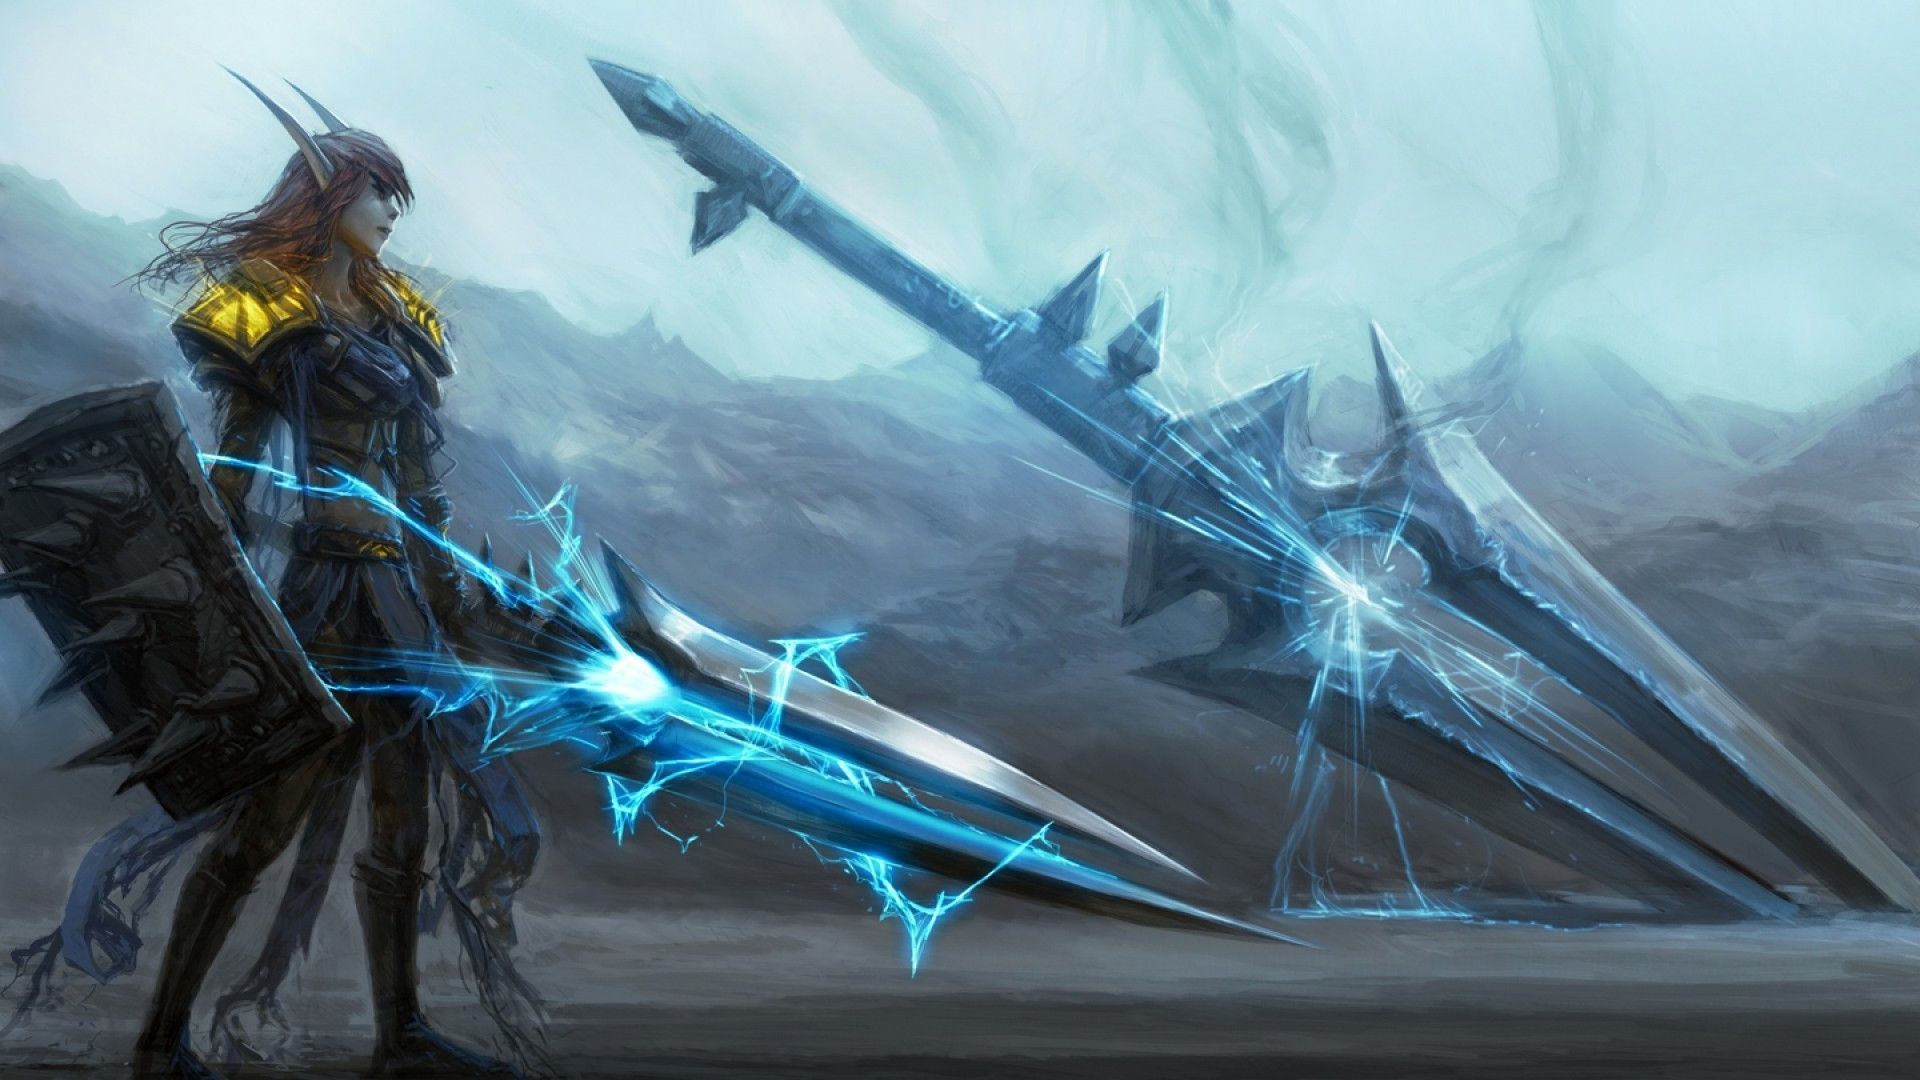 1920x1080 World of Warcraft Game Wallpapers | Best Wallpapers